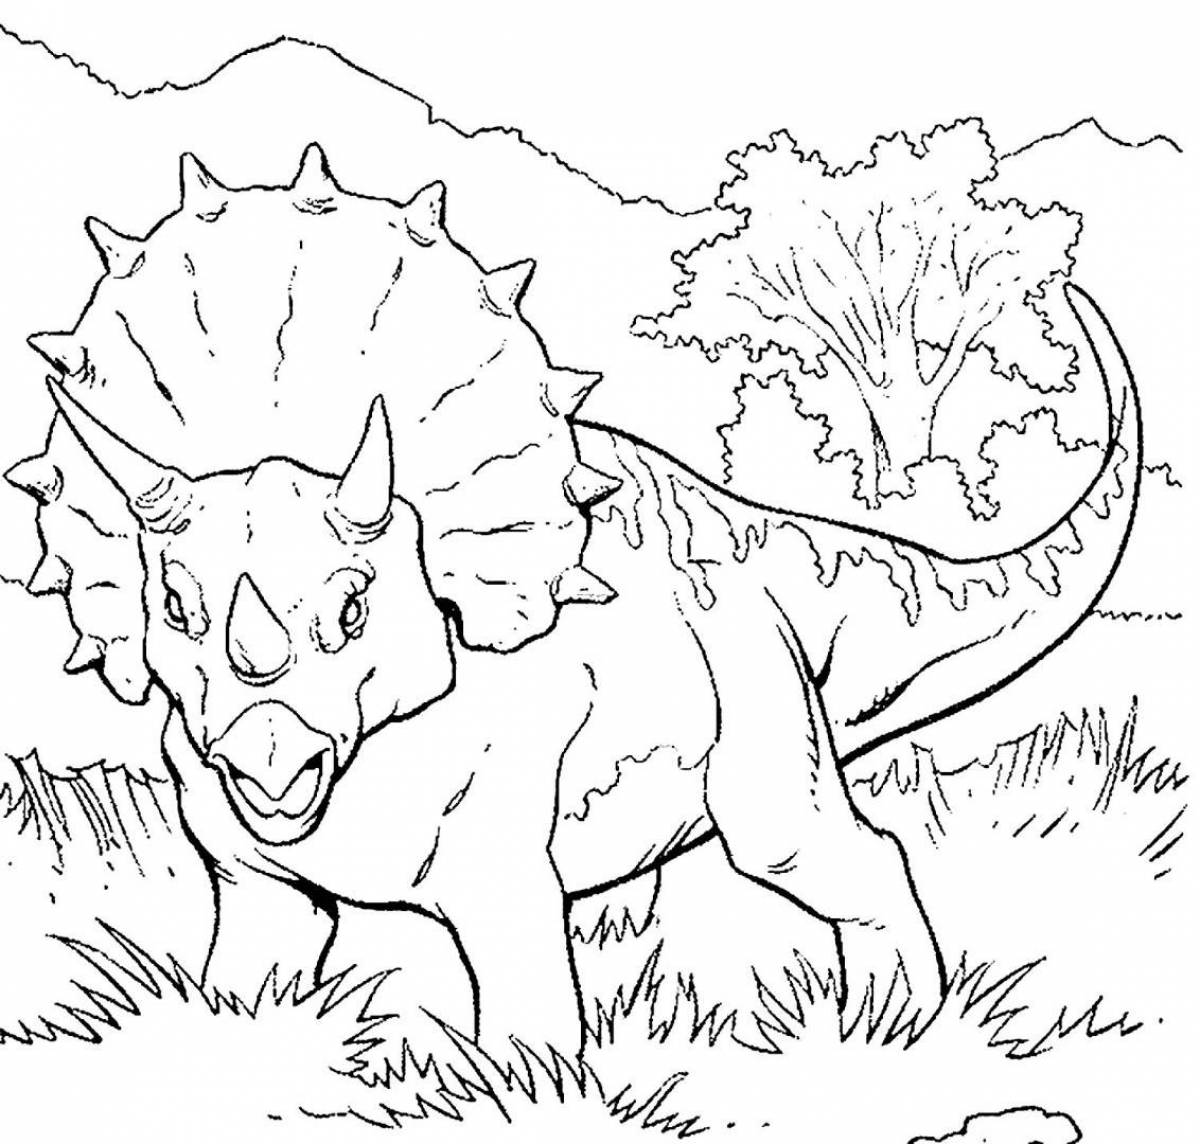 Colored cheerful dinosaur coloring book for children 4-5 years old